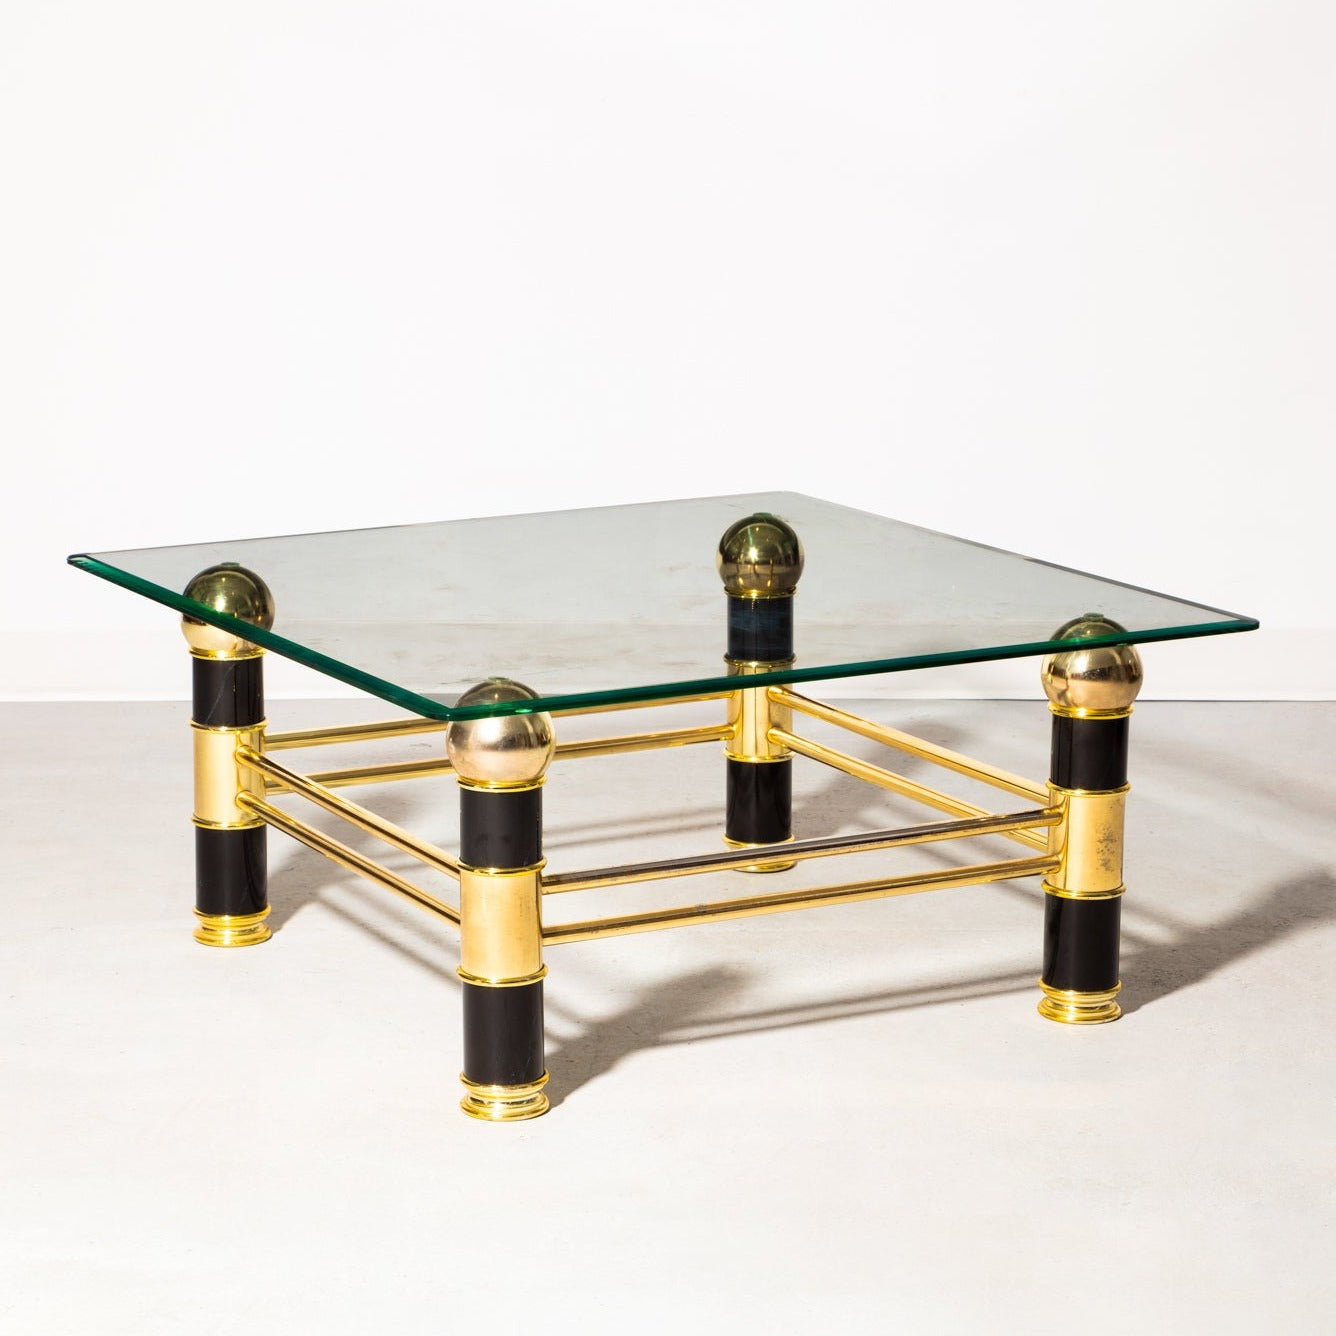 Vintage art deco coffee table. Glass with gold and lacquer finishes.